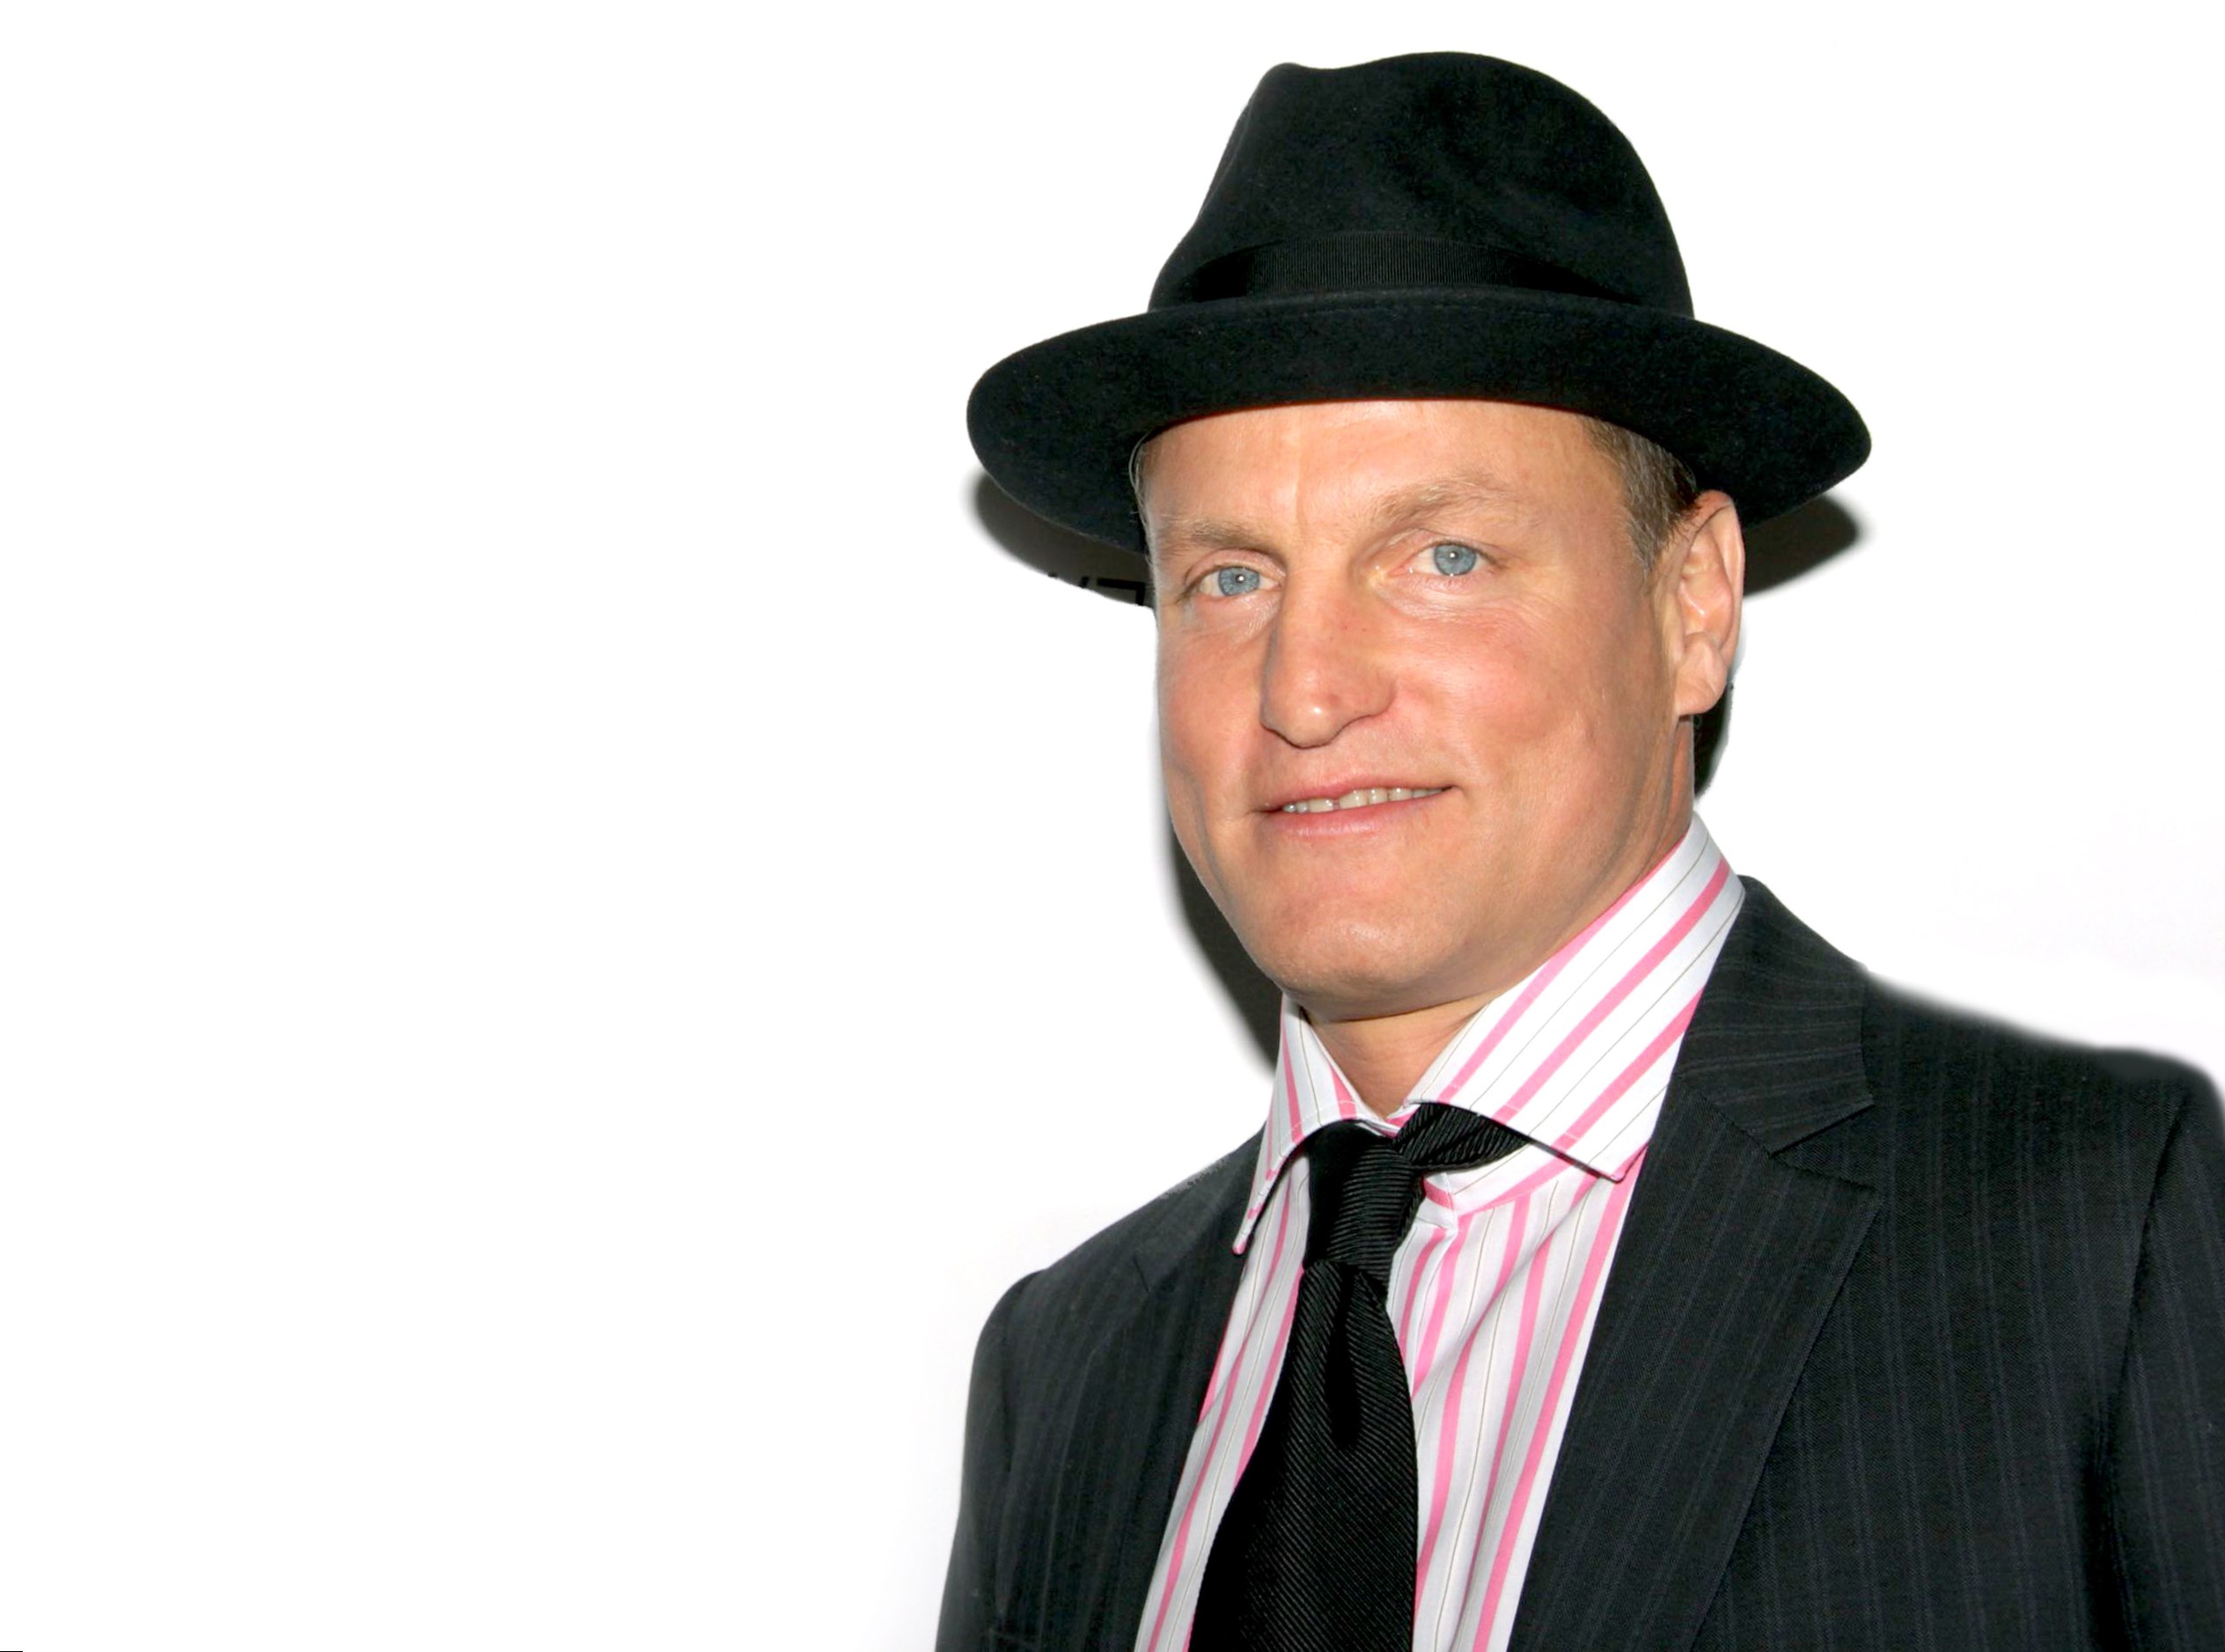 Woody Harrelson Best Movies and TV Shows. Find it out!